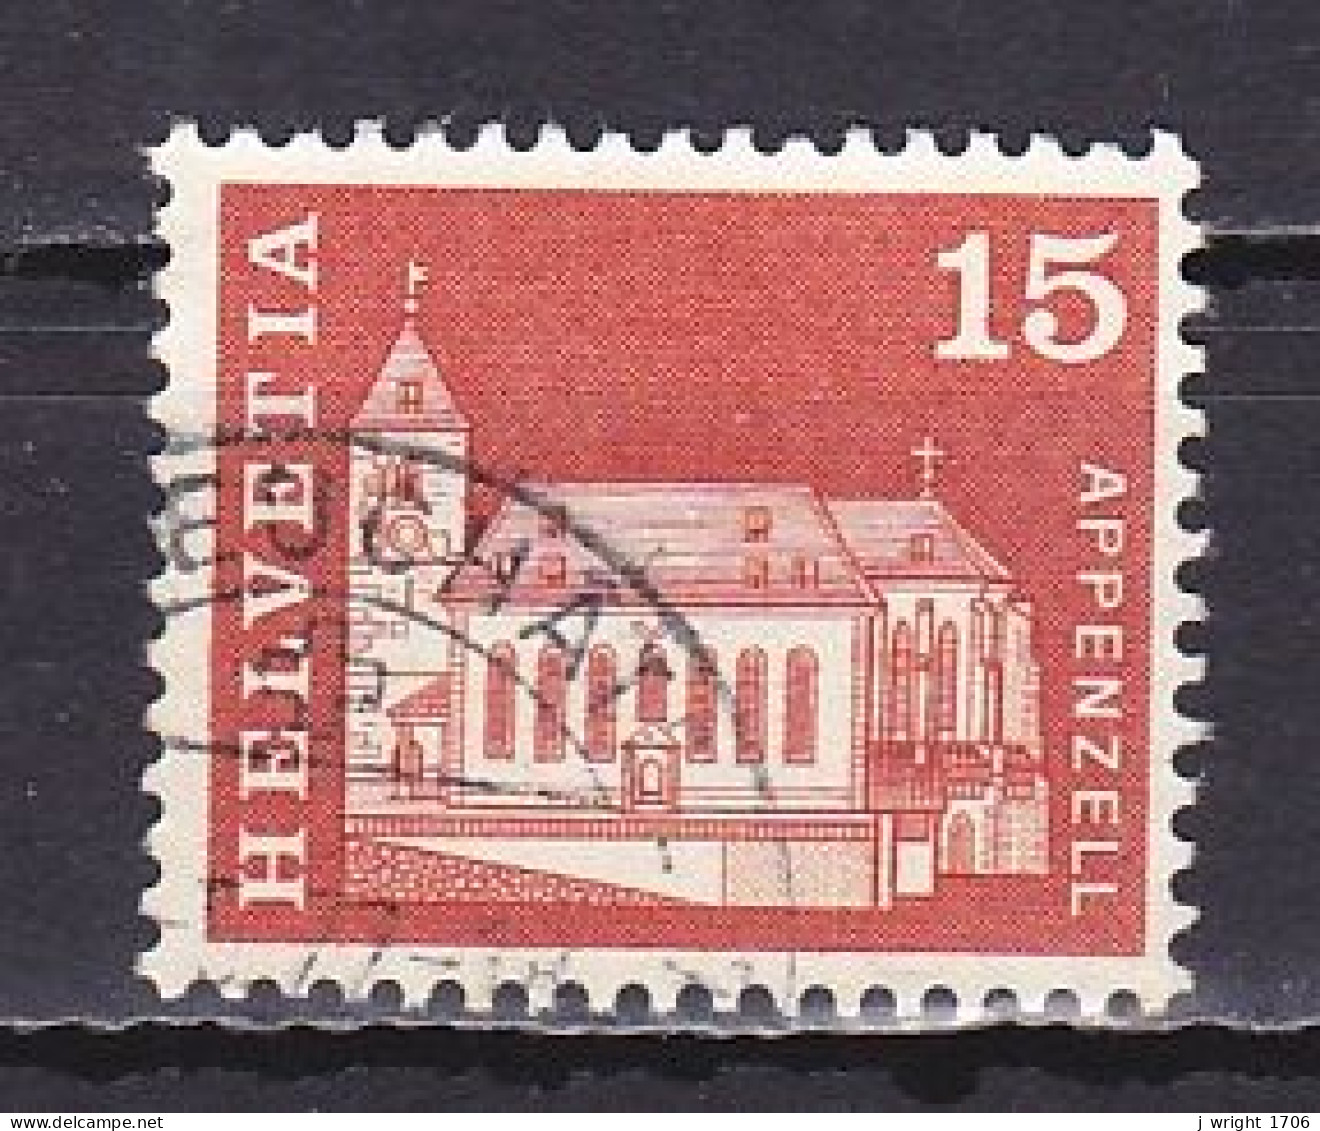 Switzerland, 1968, Monuments/Appenzell, 15c, USED - Used Stamps